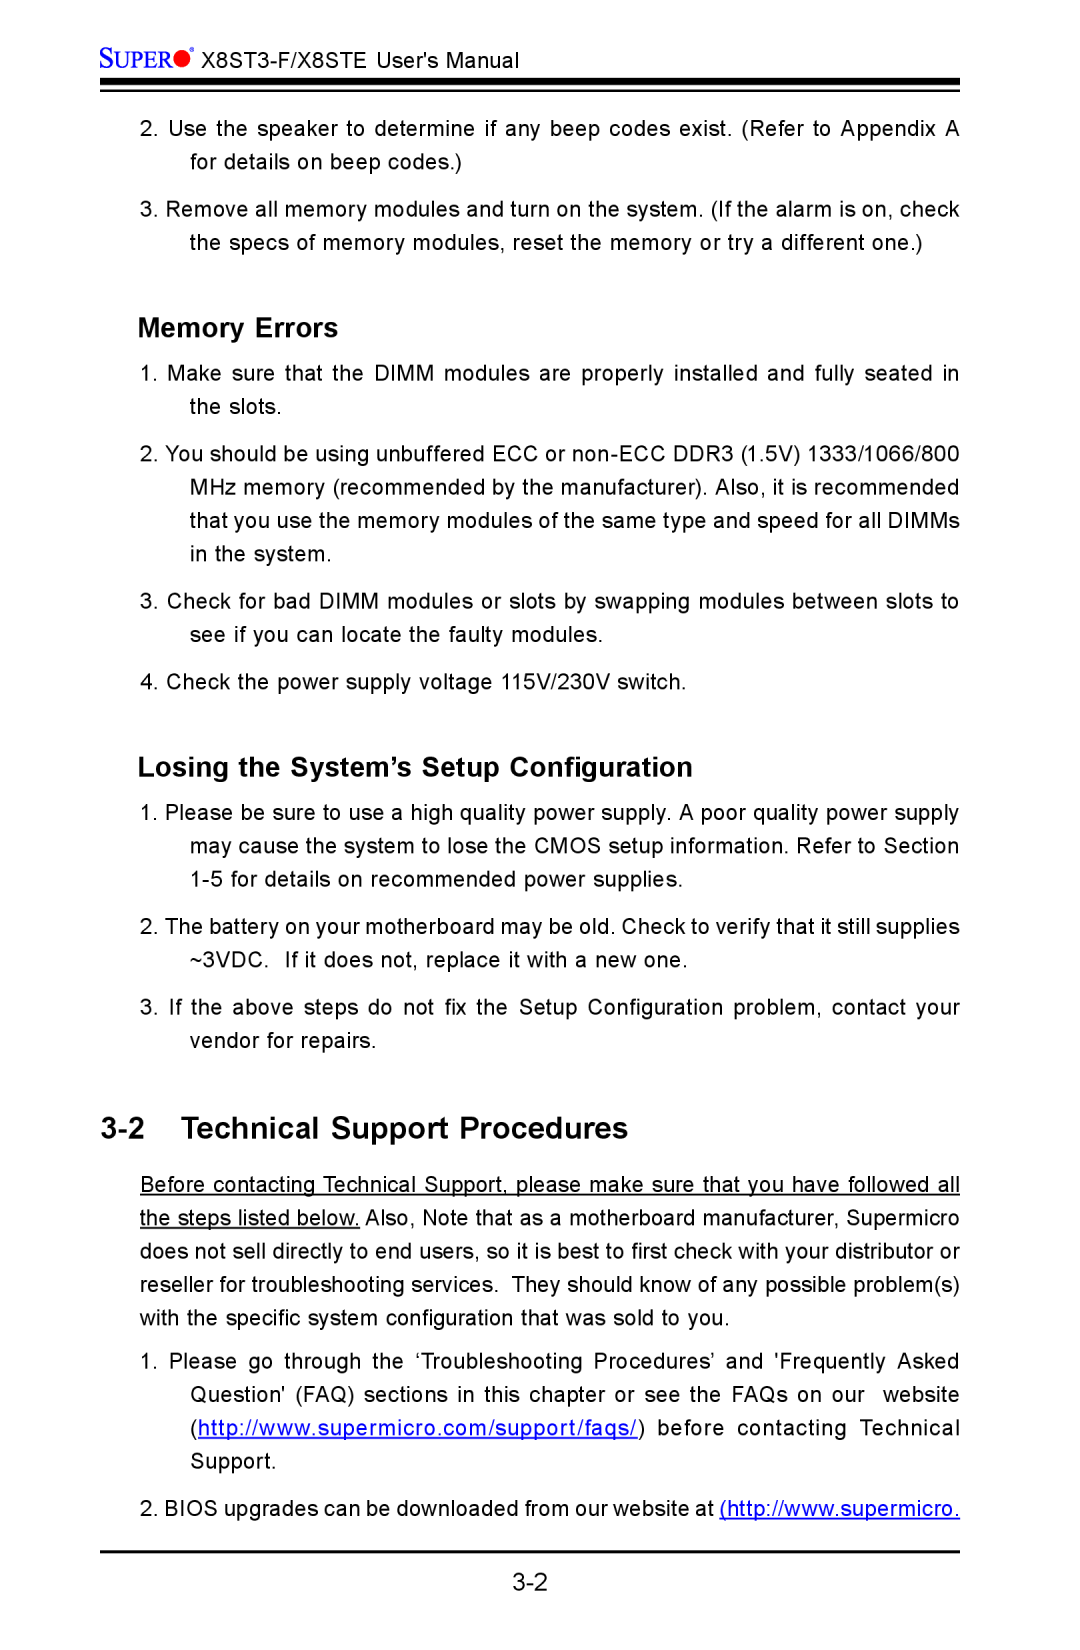 SUPER MICRO Computer X8ST3-F, X8STE Technical Support Procedures, Memory Errors, Losing the System’s Setup Configuration 